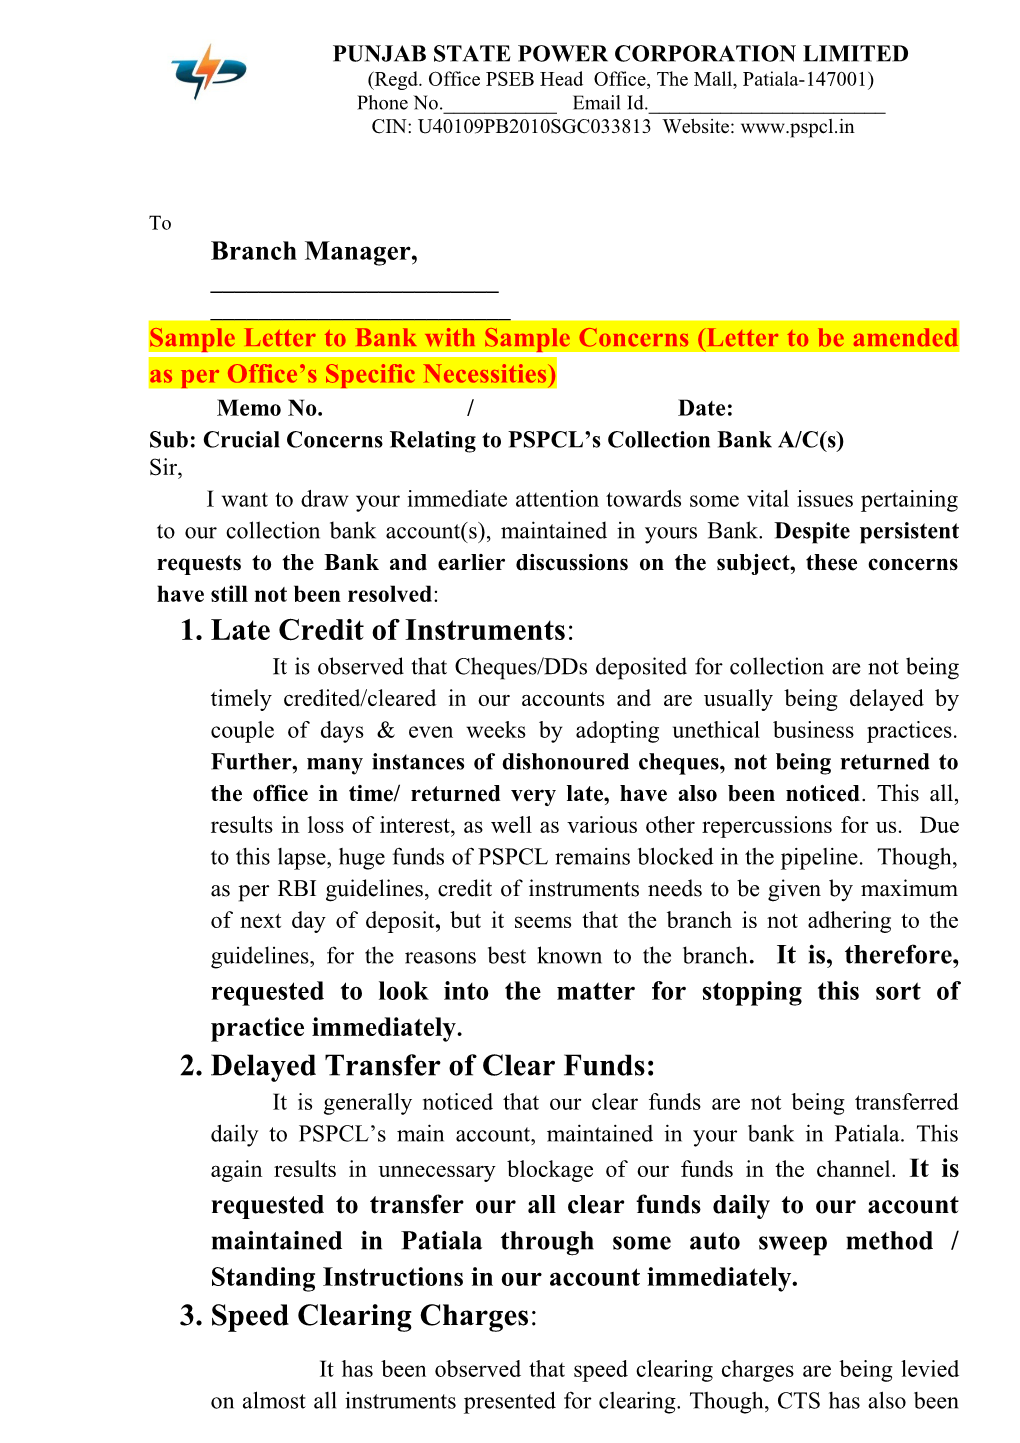 Sub: Crucial Concerns Relating Topspcl S Collection Bank A/C(S)